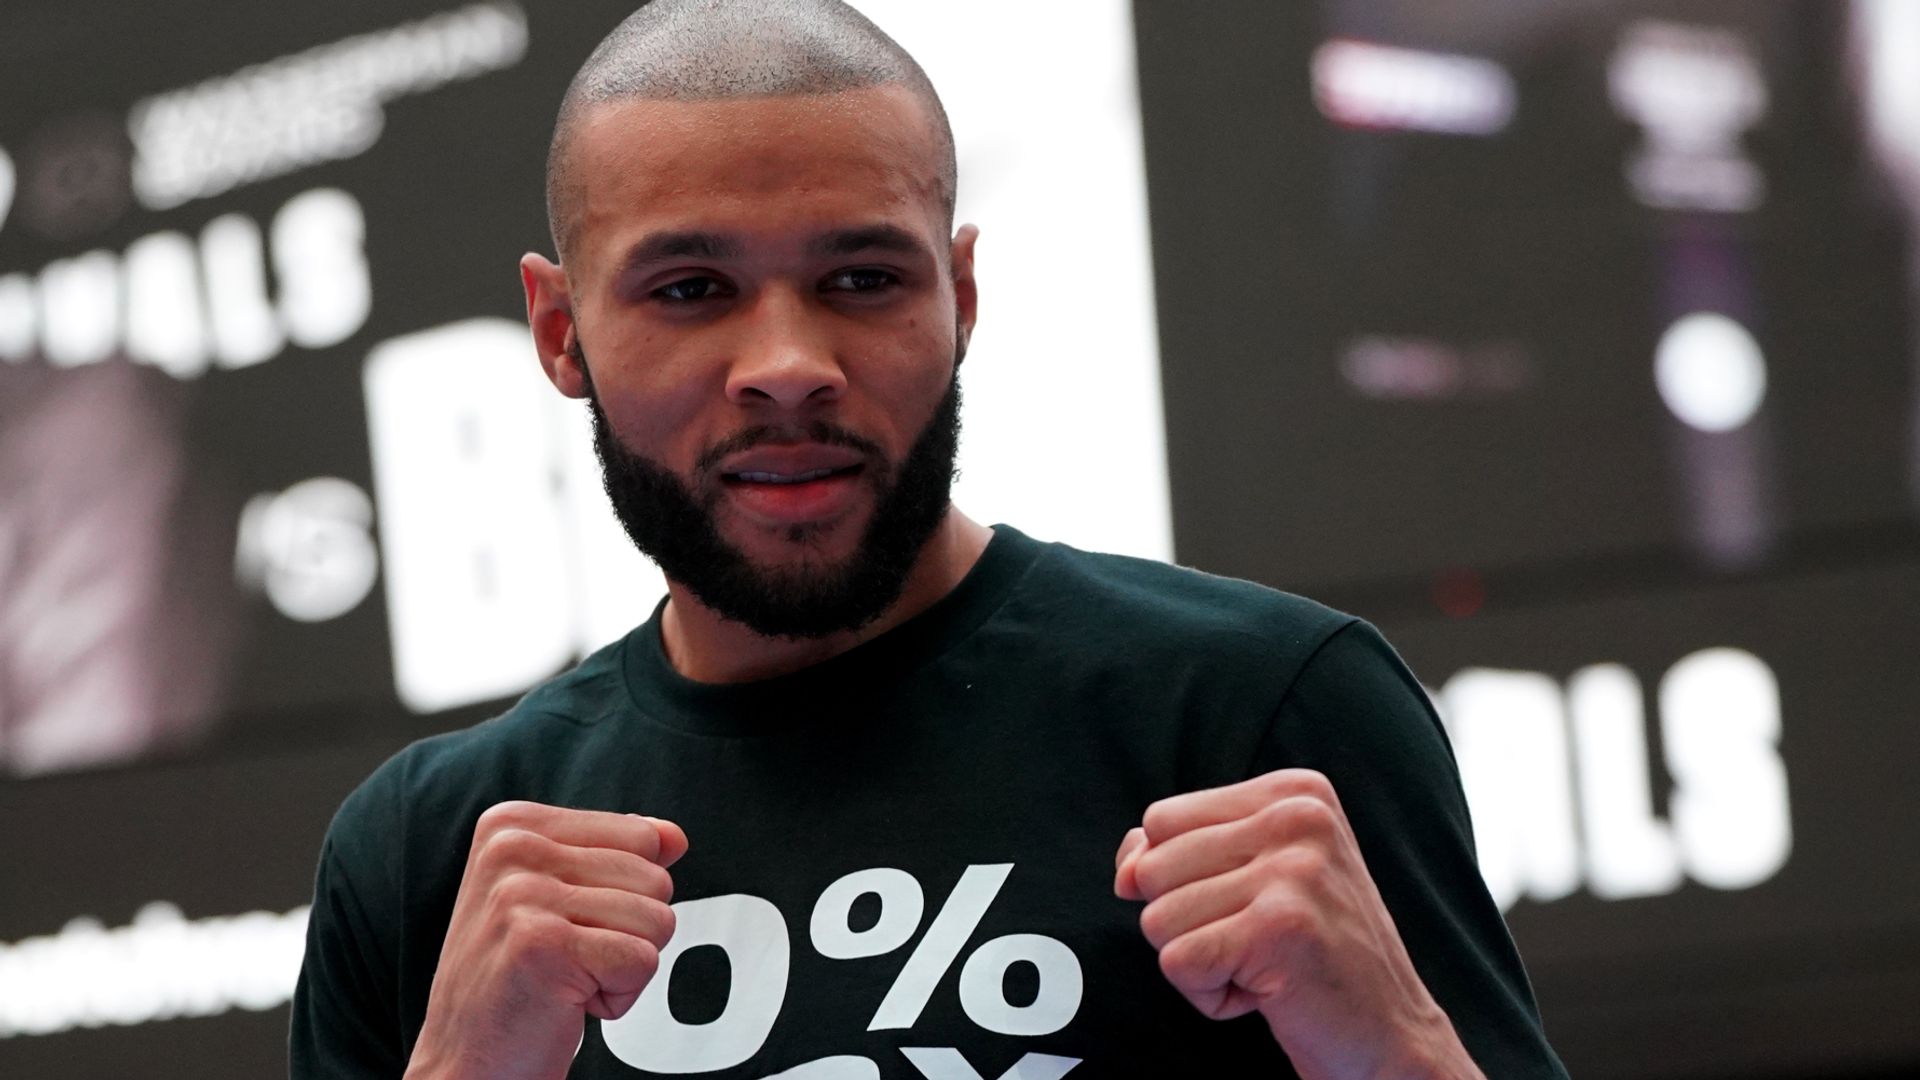 LISTEN: Shalom on Eubank-Smith and Taylor-Catterall latest